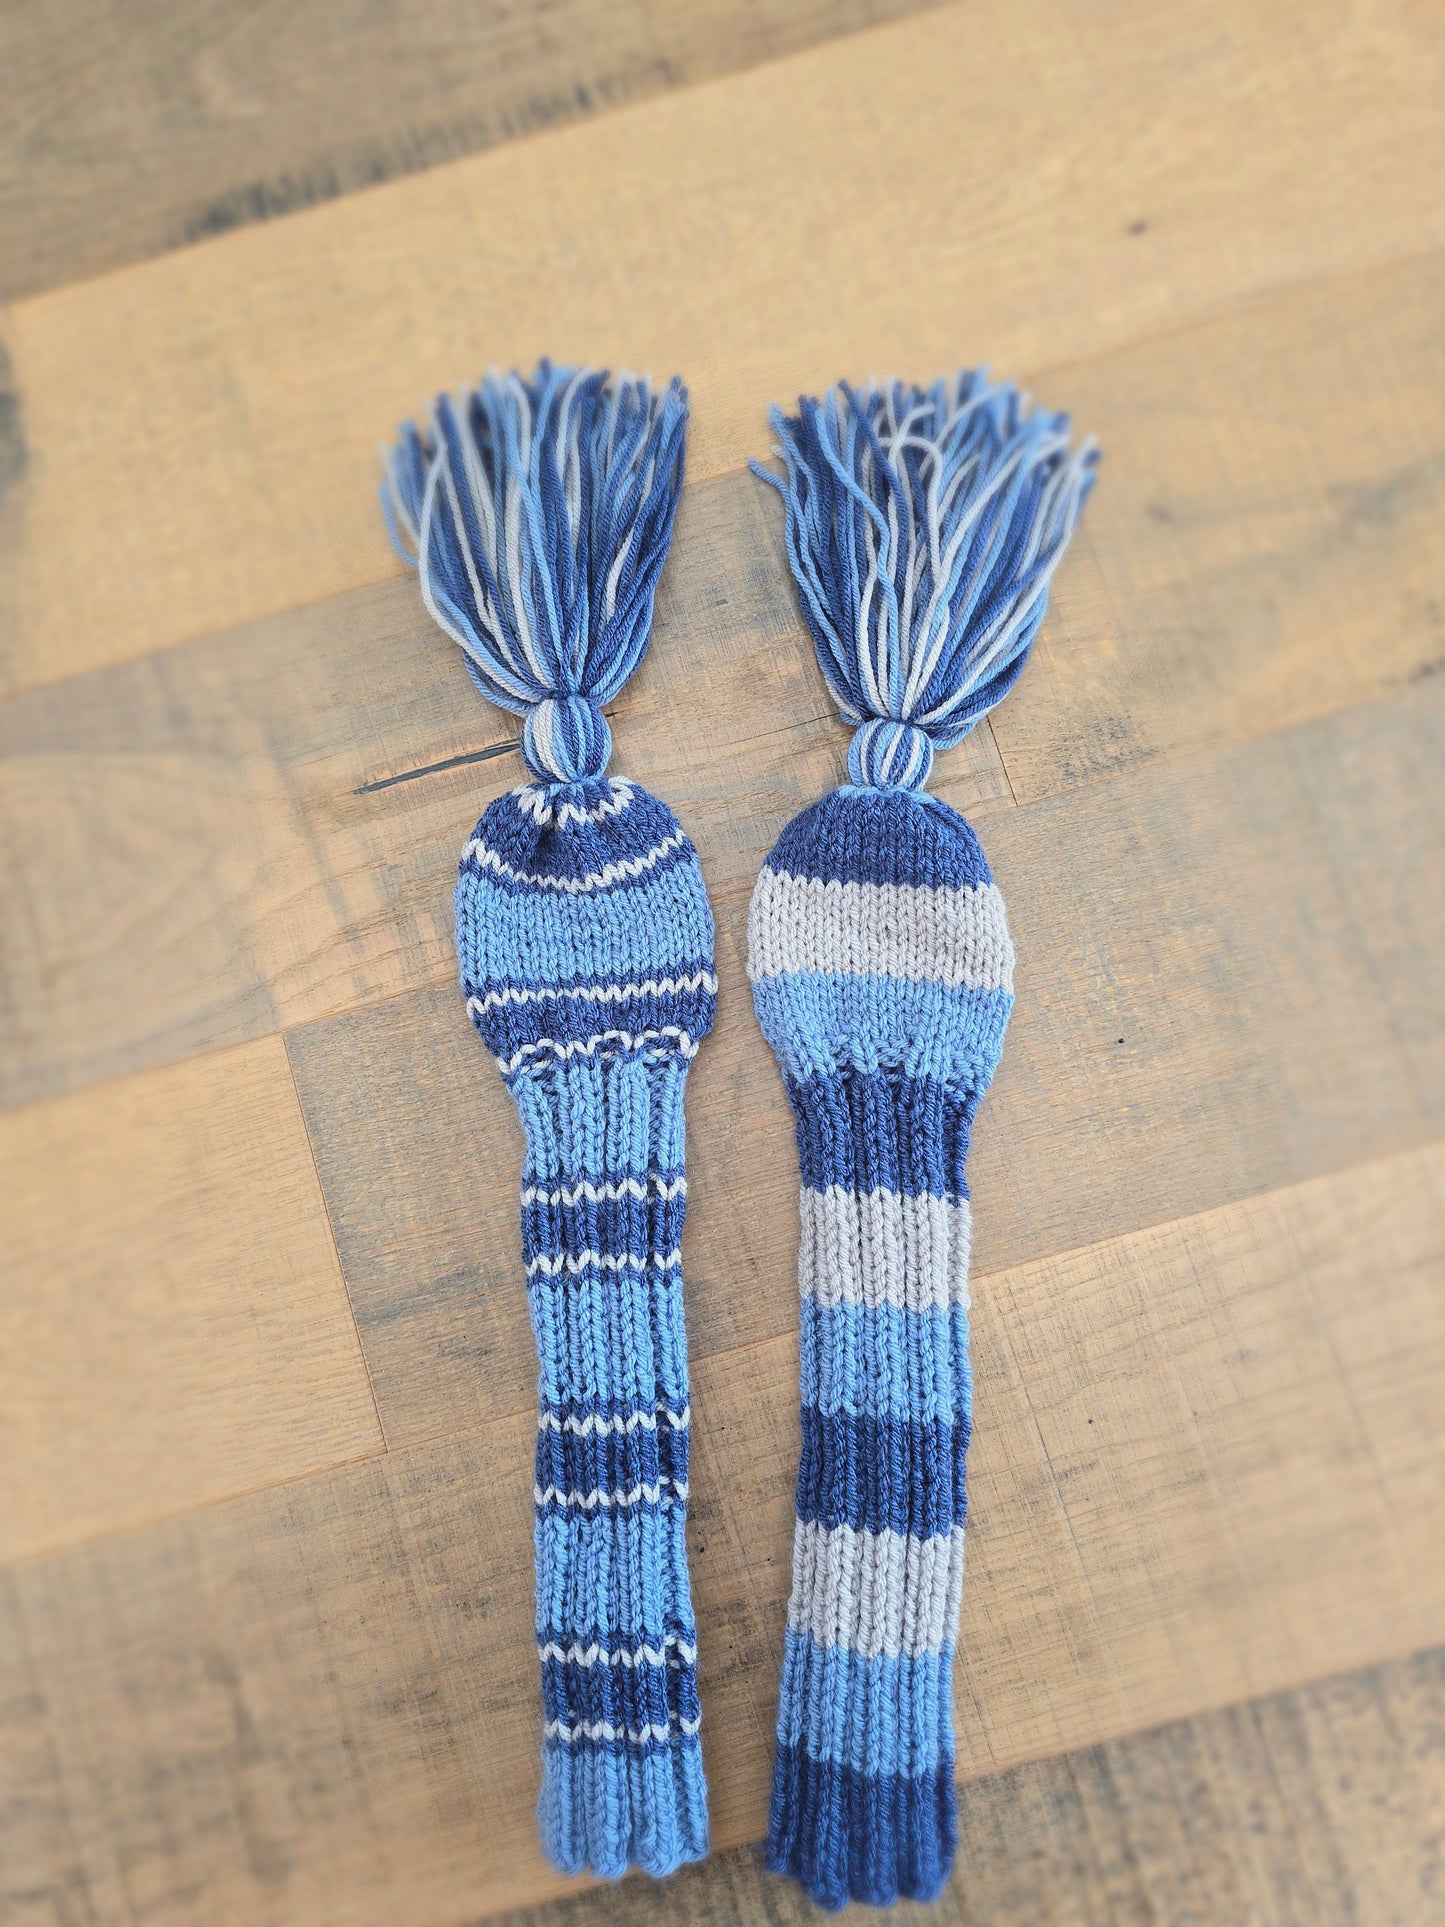 Two Golf Club Head Covers Retro-Vintage Ombre Blue & Gray with Tassels for Fairway Woods